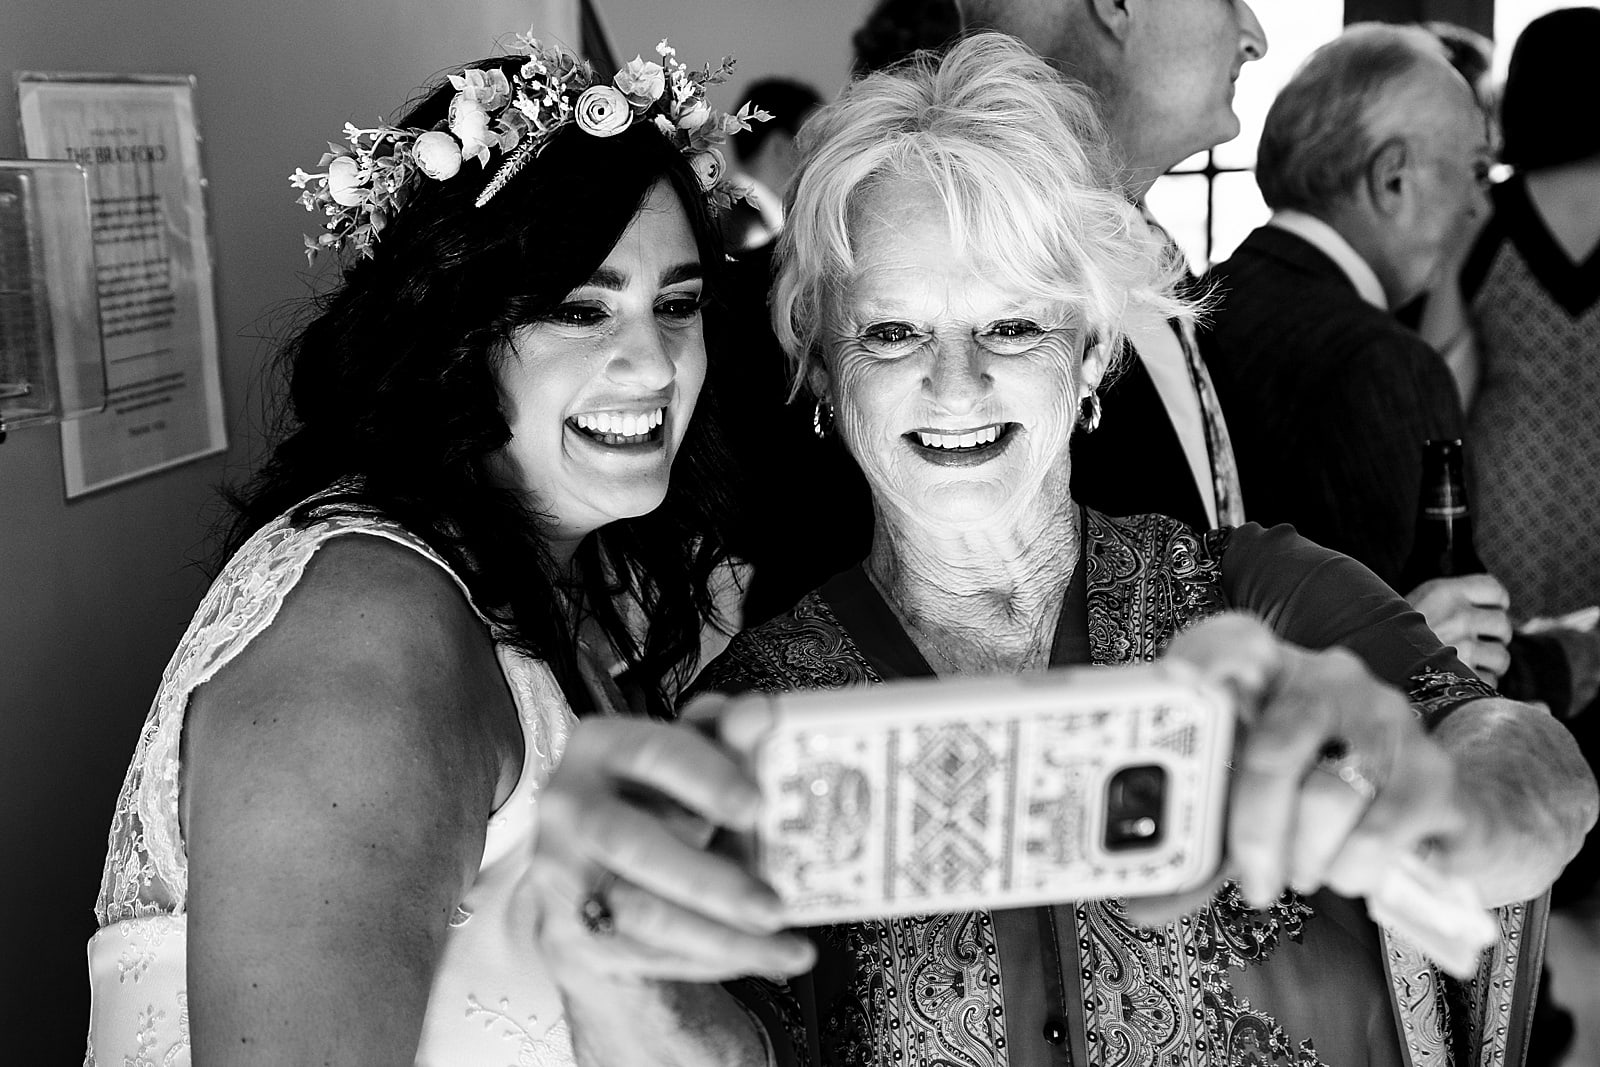 Wedding tip: say YES to everyone who asks for a photo with you. especially your grandma!